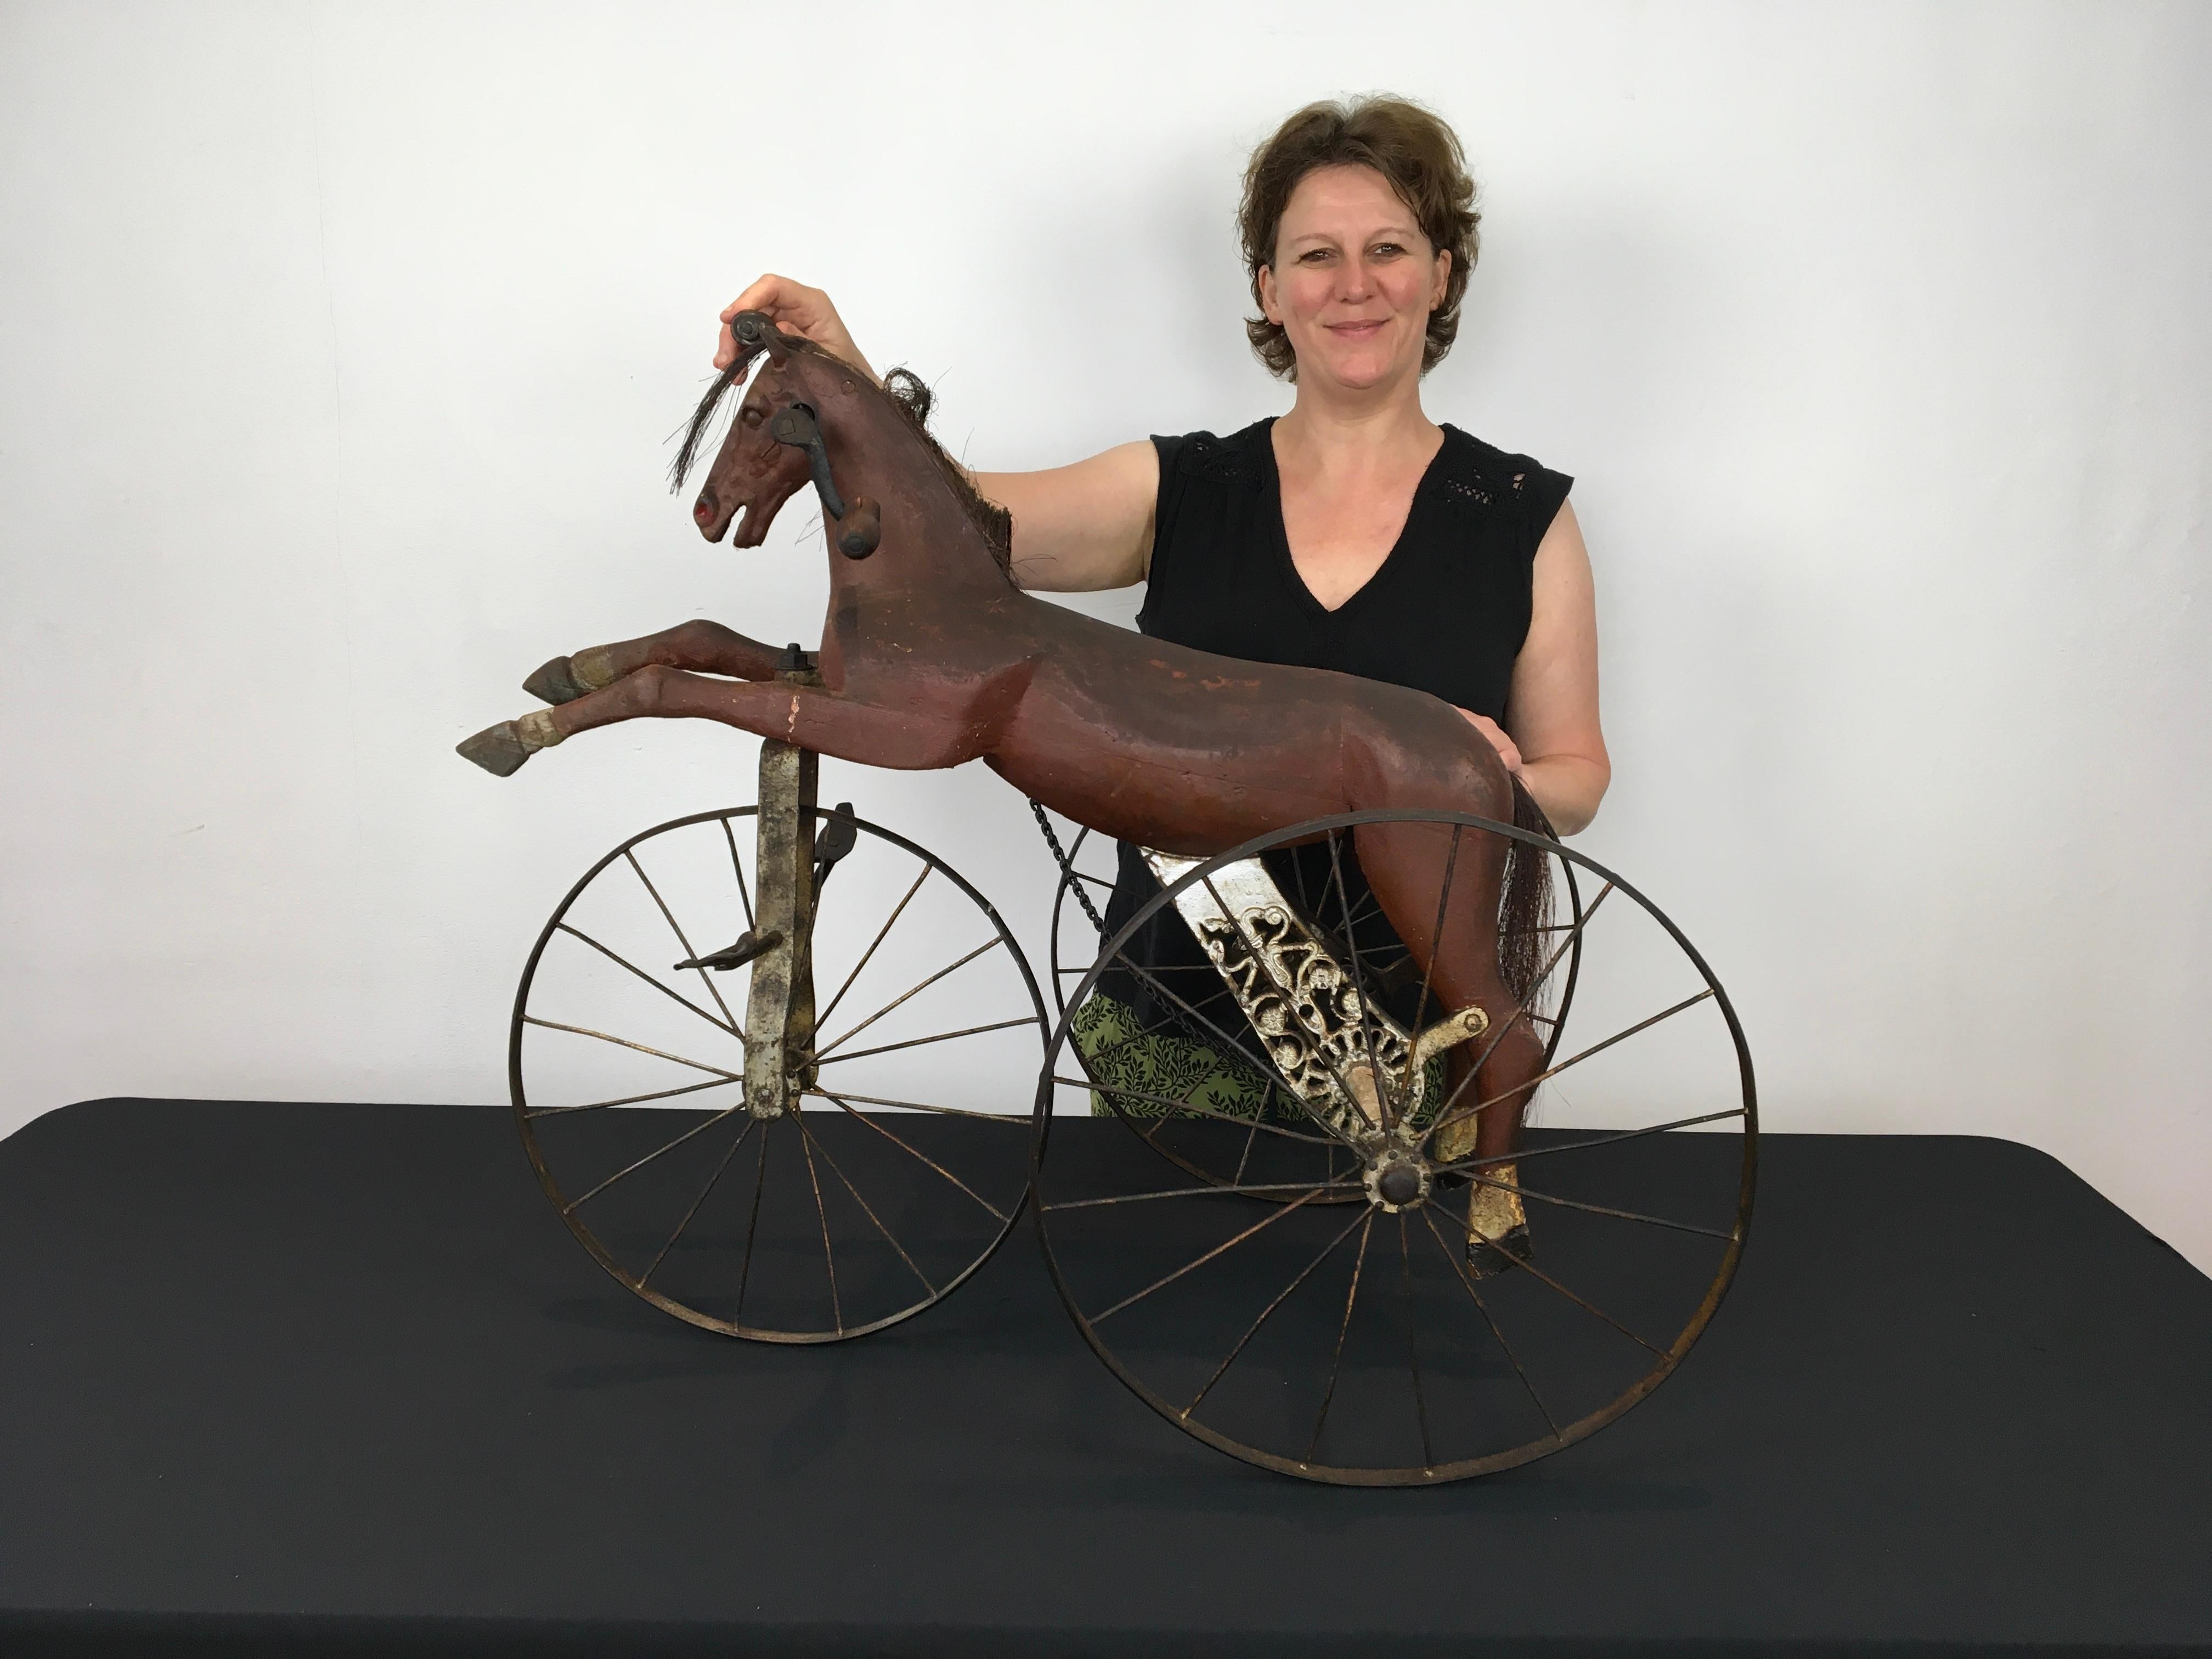 Antique tricycle horse toy - children's tricycle with horse. 
A French antique horse toy circa 1890 - 1910.
A horse toy on three iron wheels - tricycle toy.
The horse head is made of iron,  the body of the horse is carved wood with also wooden